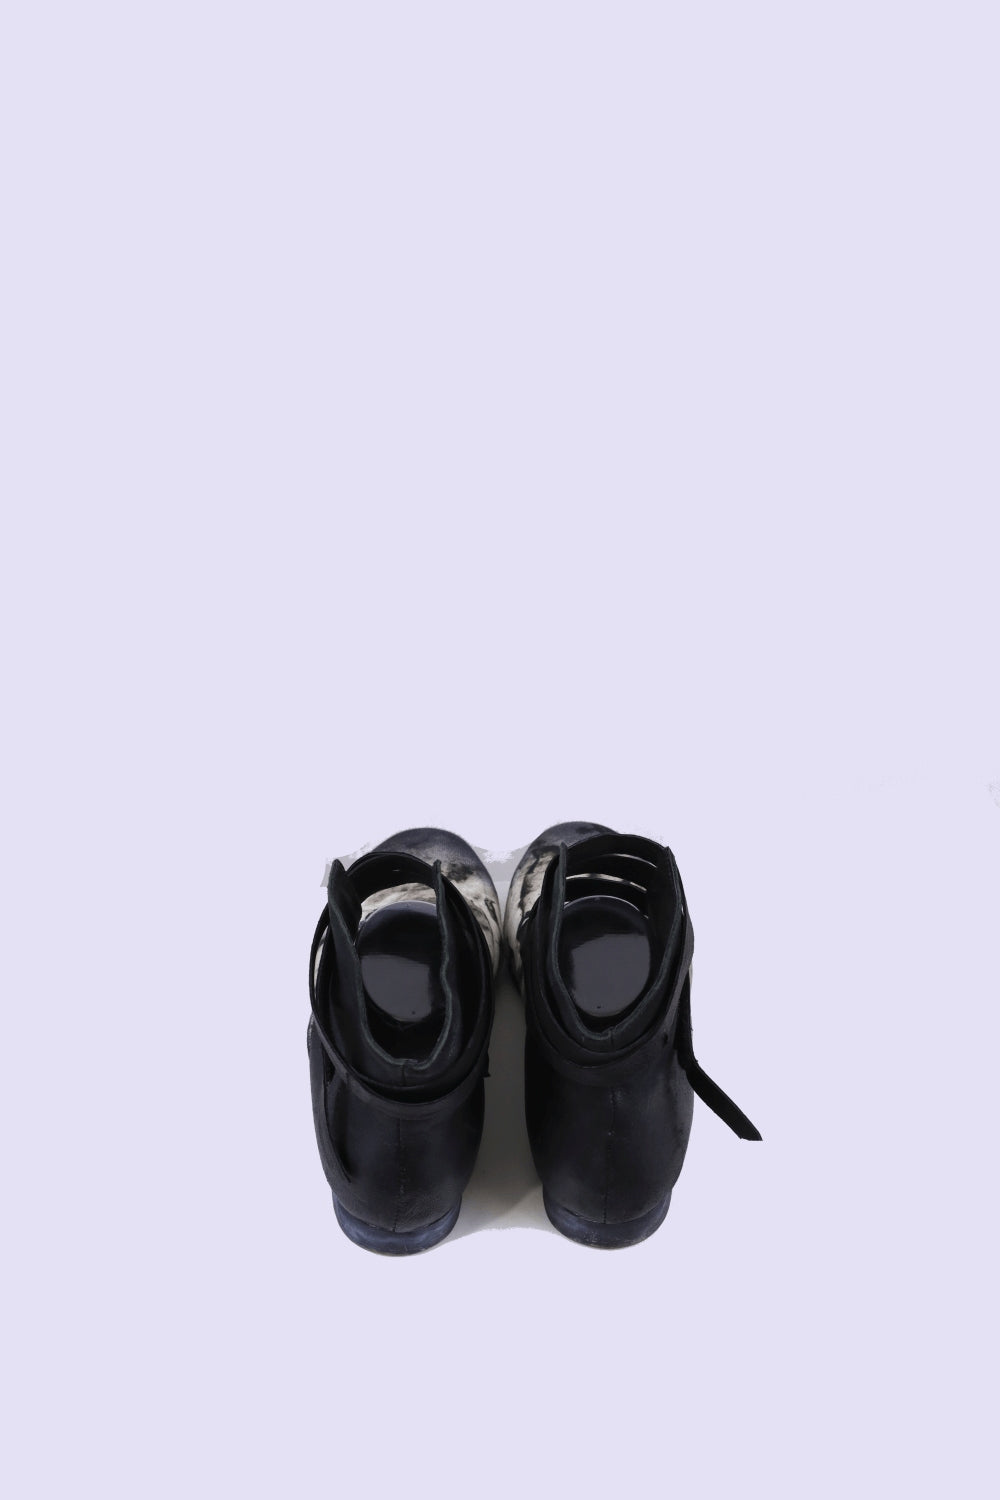 Papucel Black And White Closed Toe Shoes 8